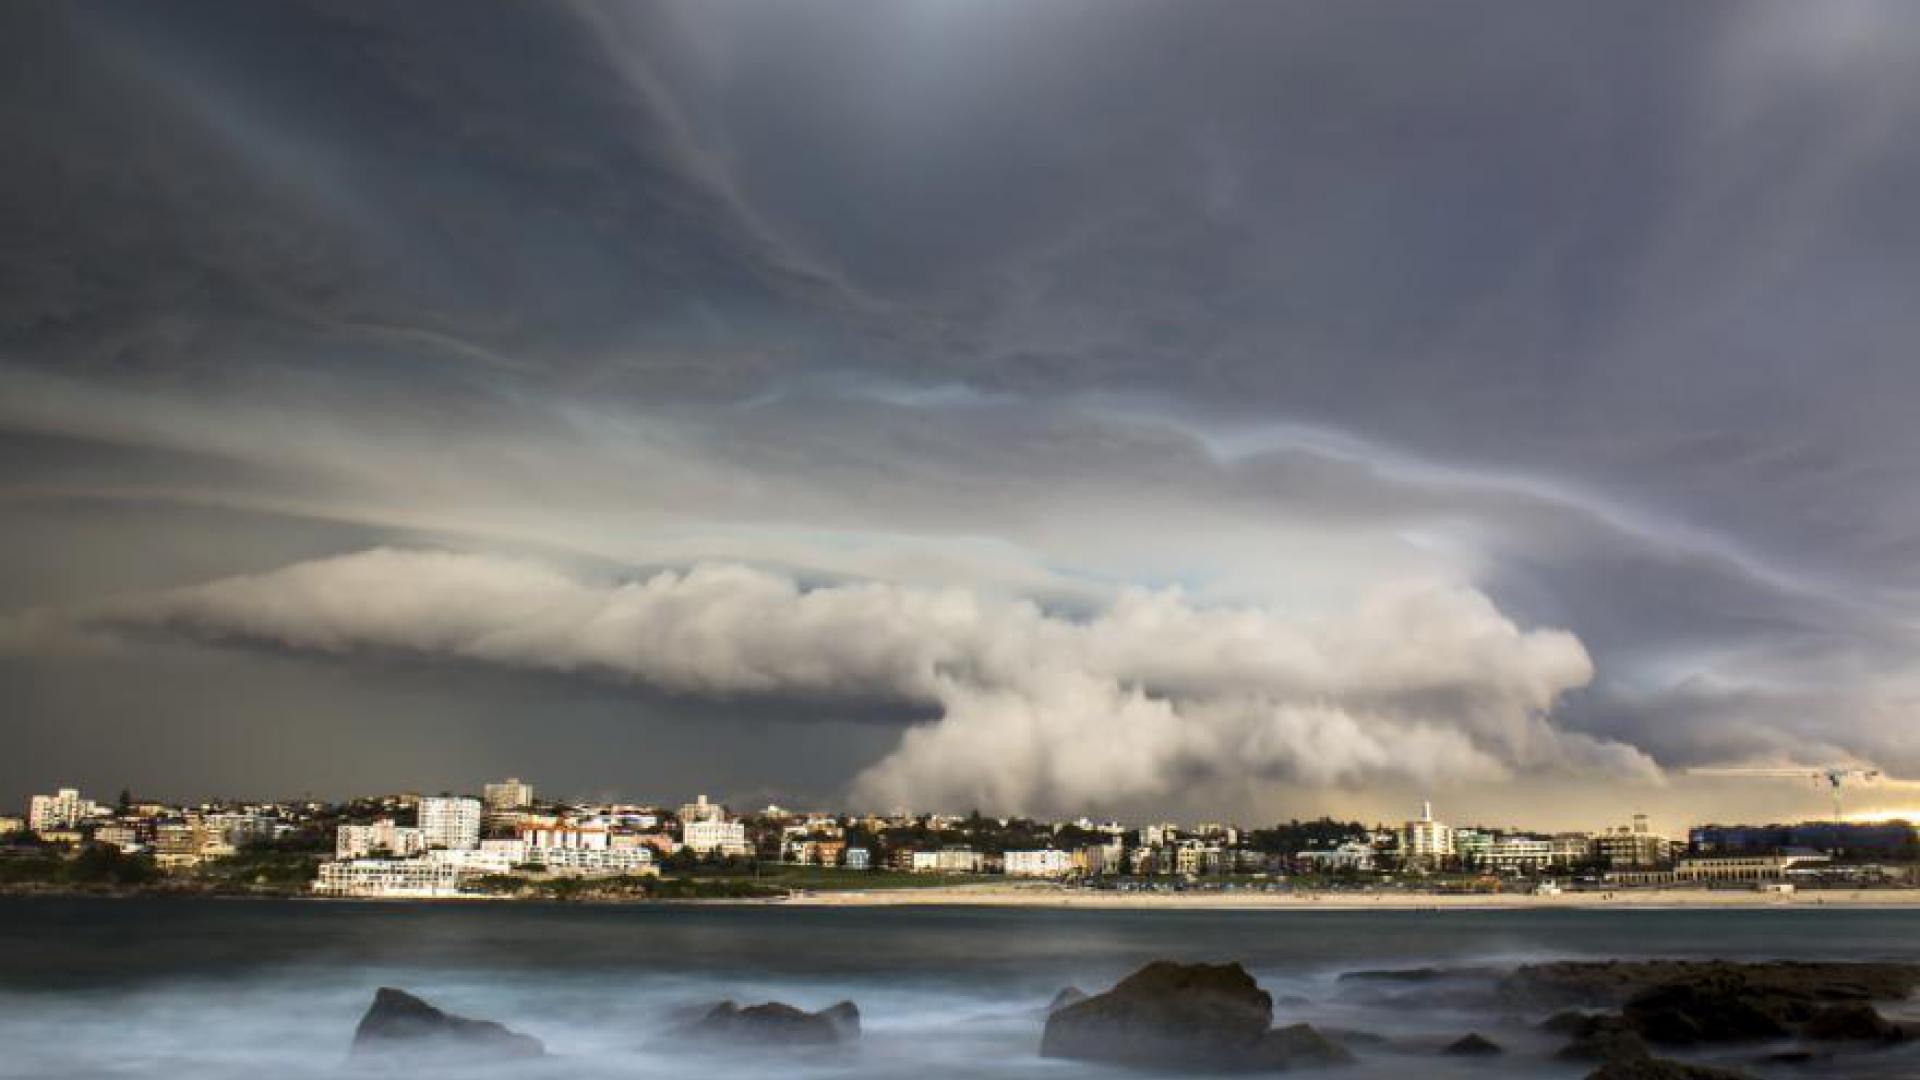 Image of cloudy skies over a coastal Australian town.